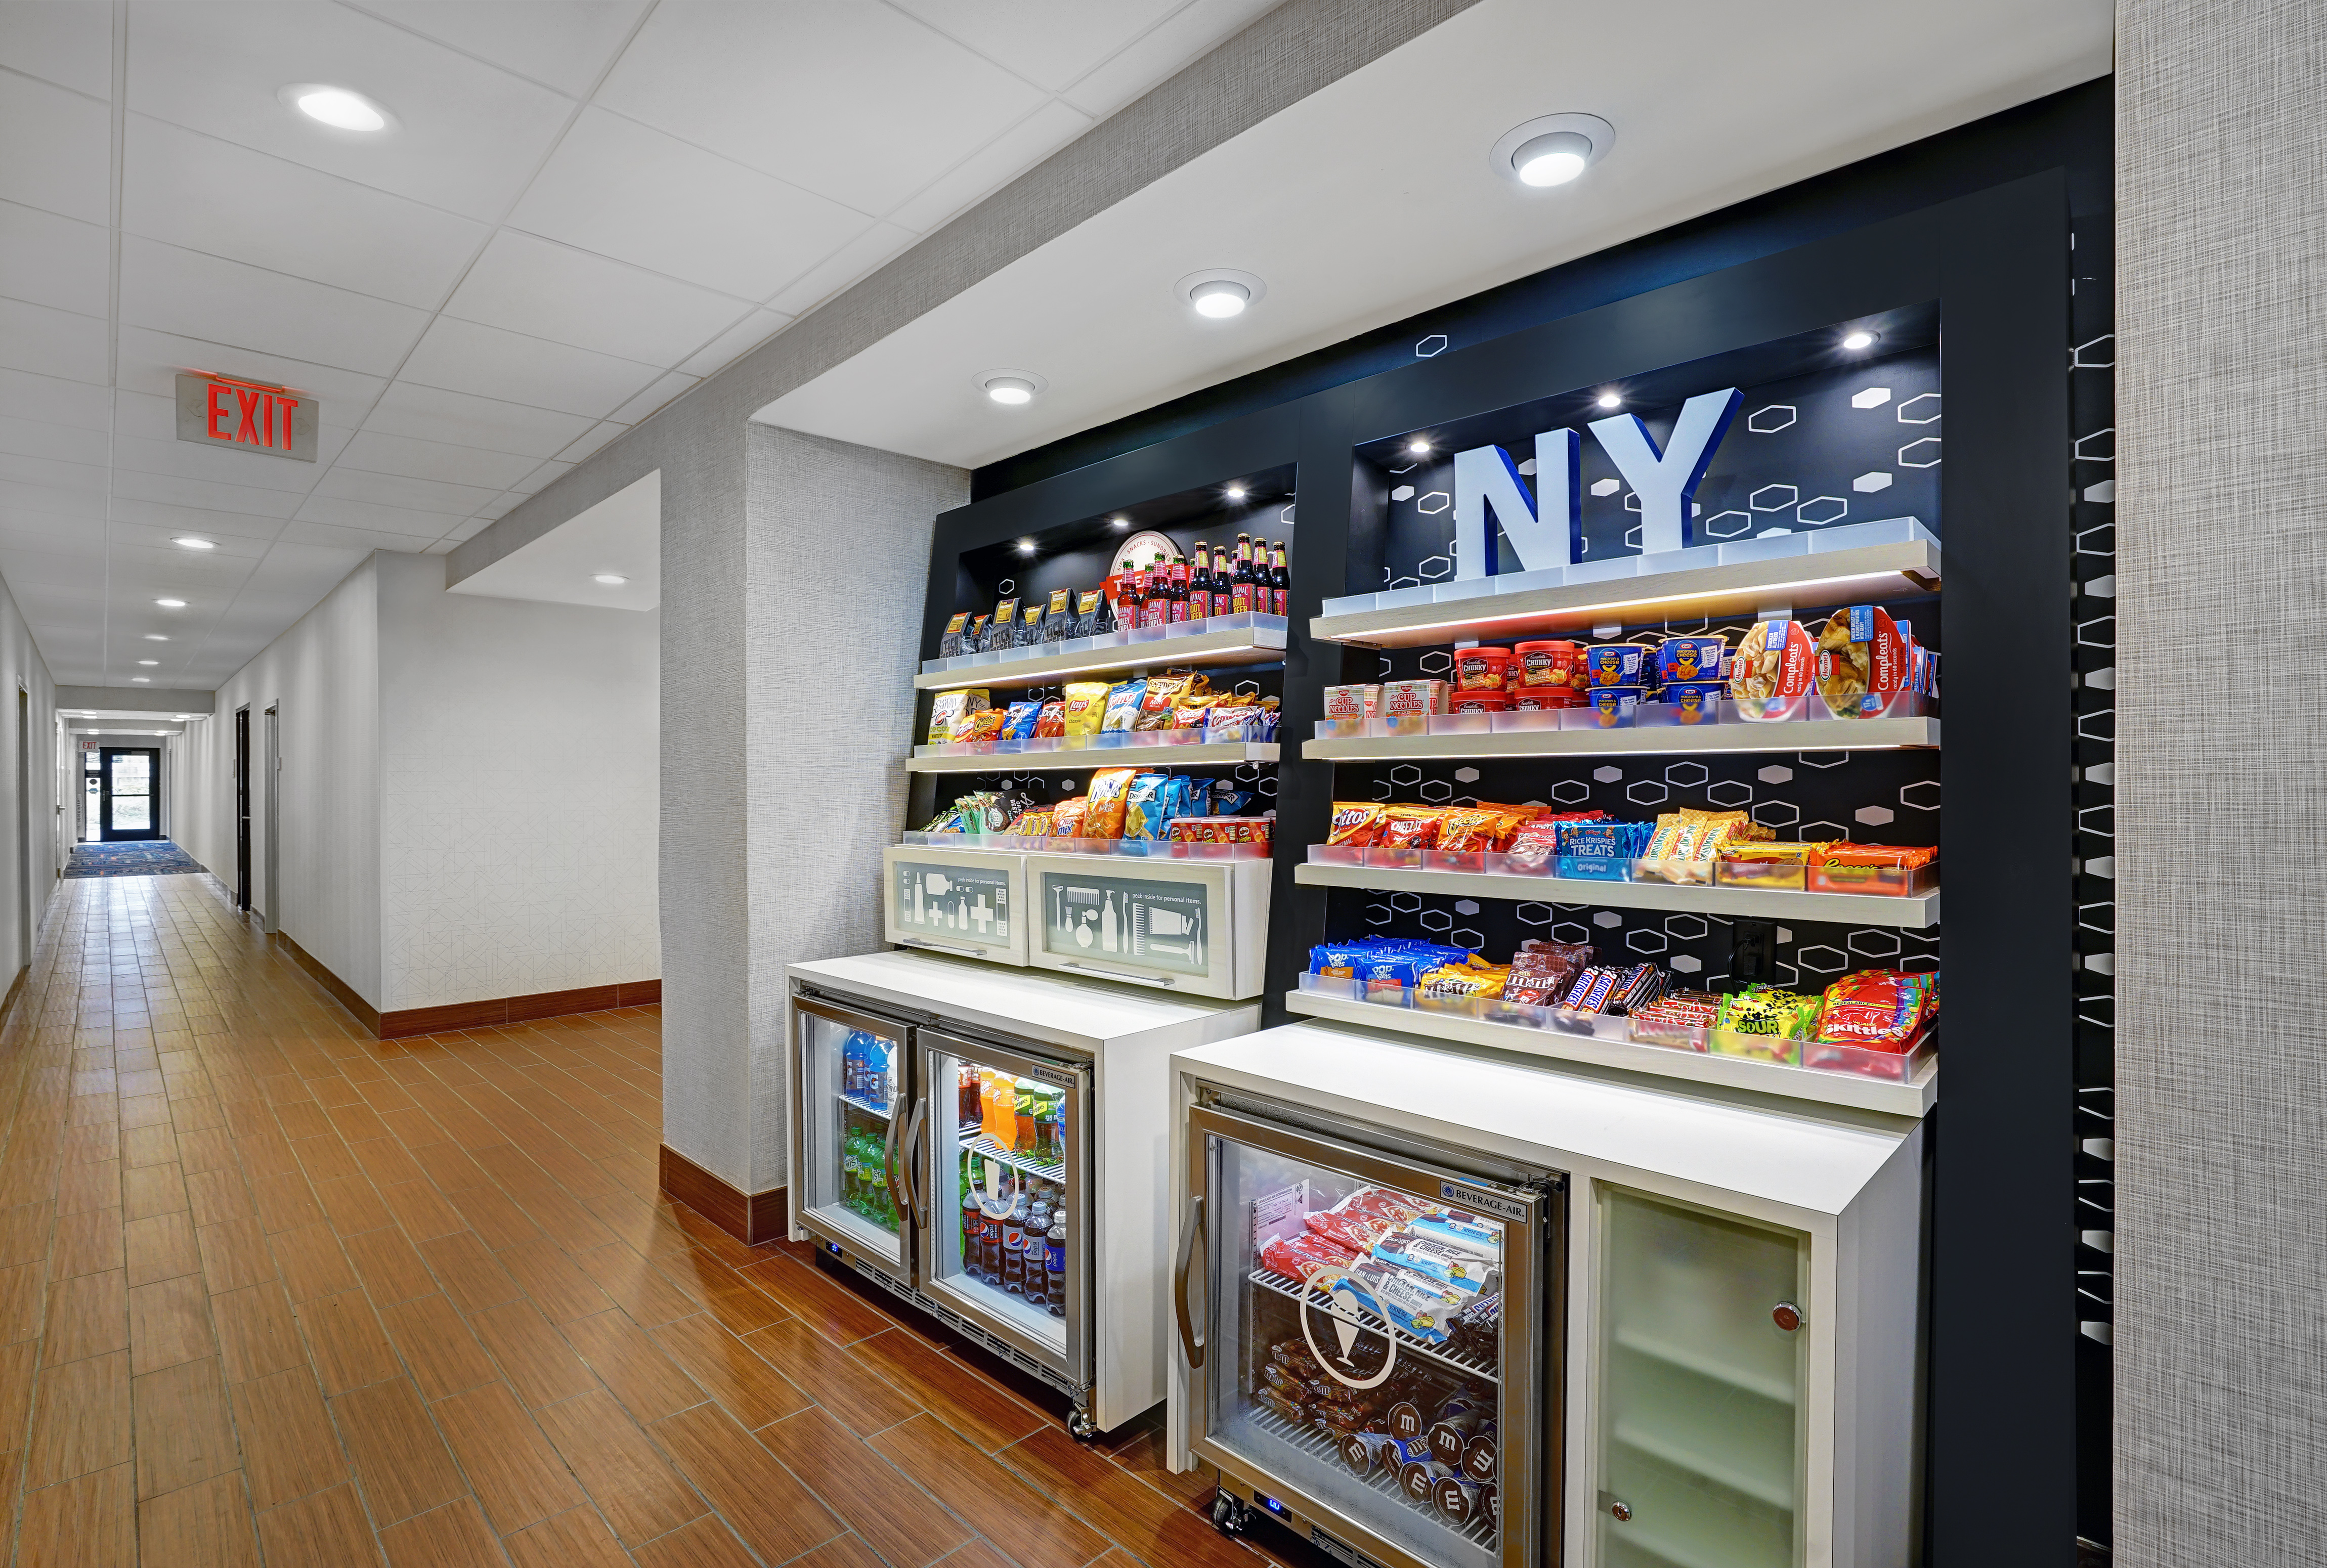 Treat area with snacks and fridges